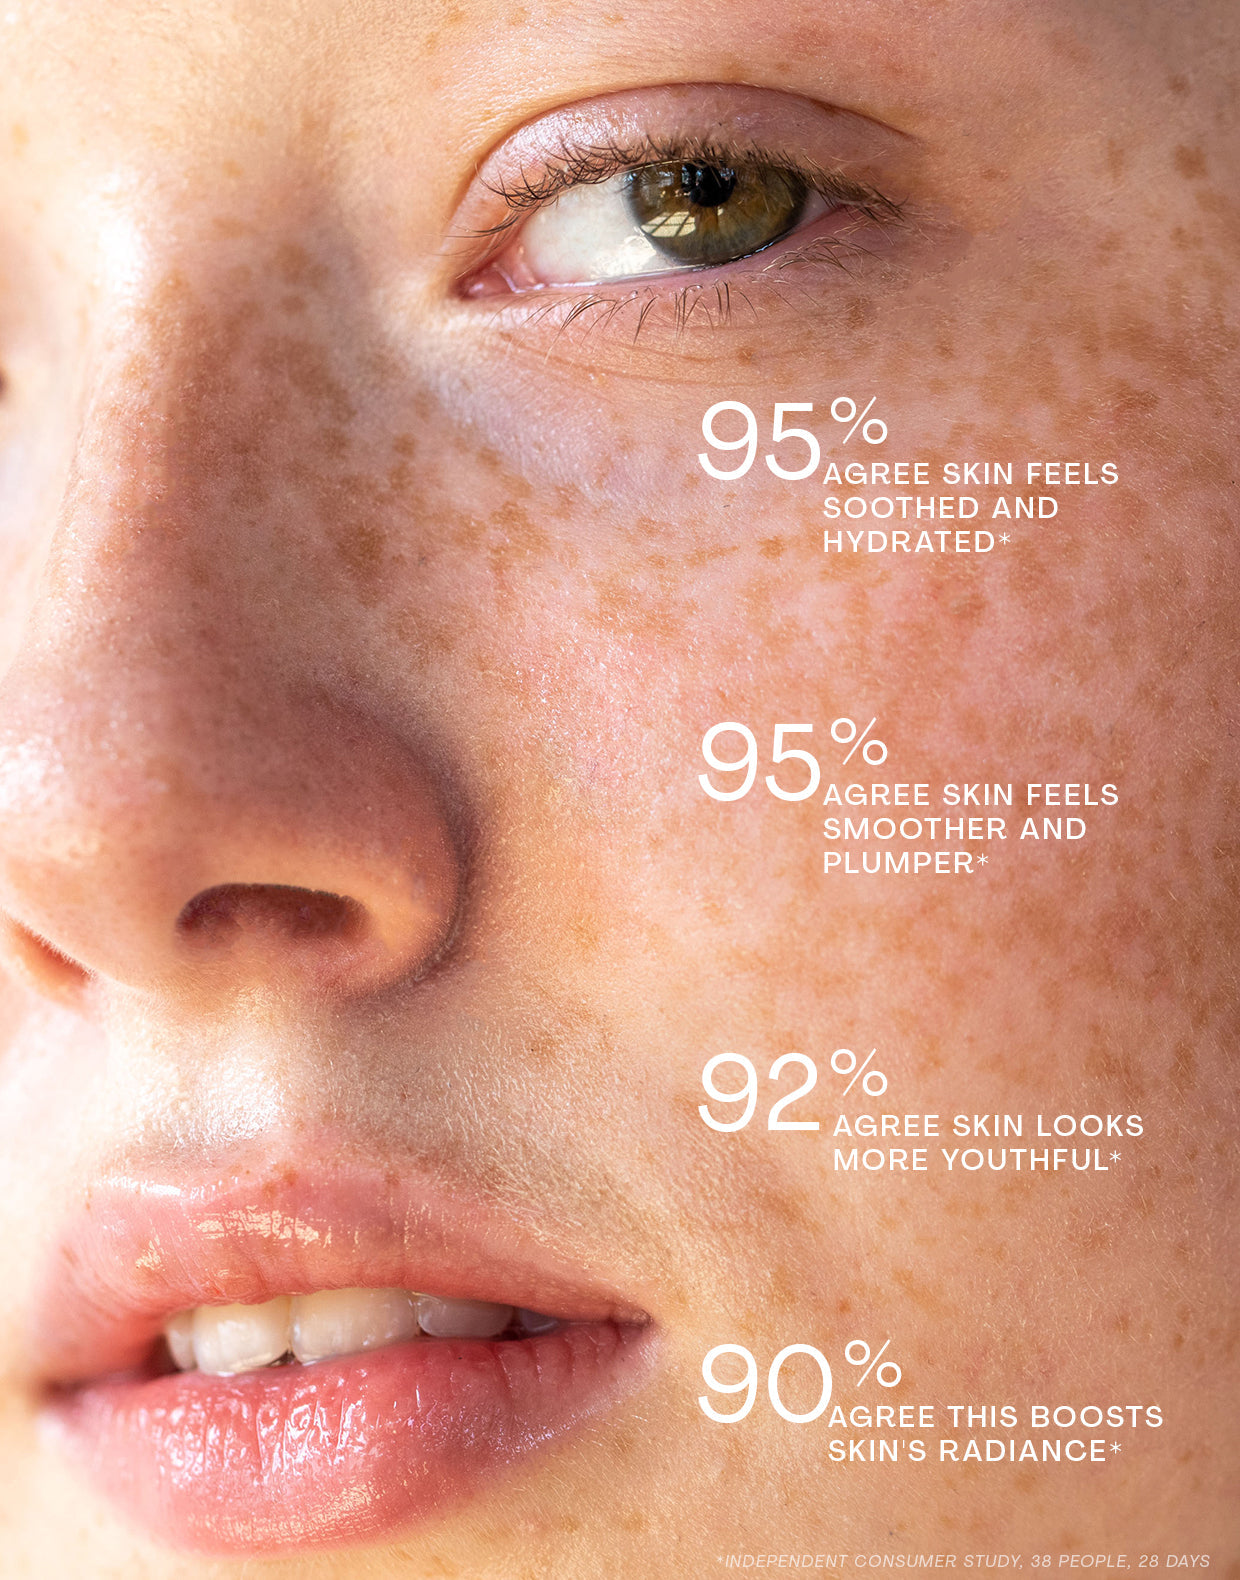 Photo of model with The Outset serum on her face with claims from customers on top of photo. 95% agree skin feels soothed and hydrated; 95% agree skin feels smoother and plumper; 92% agree skin looks more youthful; 90% agree this boosts skin’s radiance *independent consumer study, 38 people, 28 days